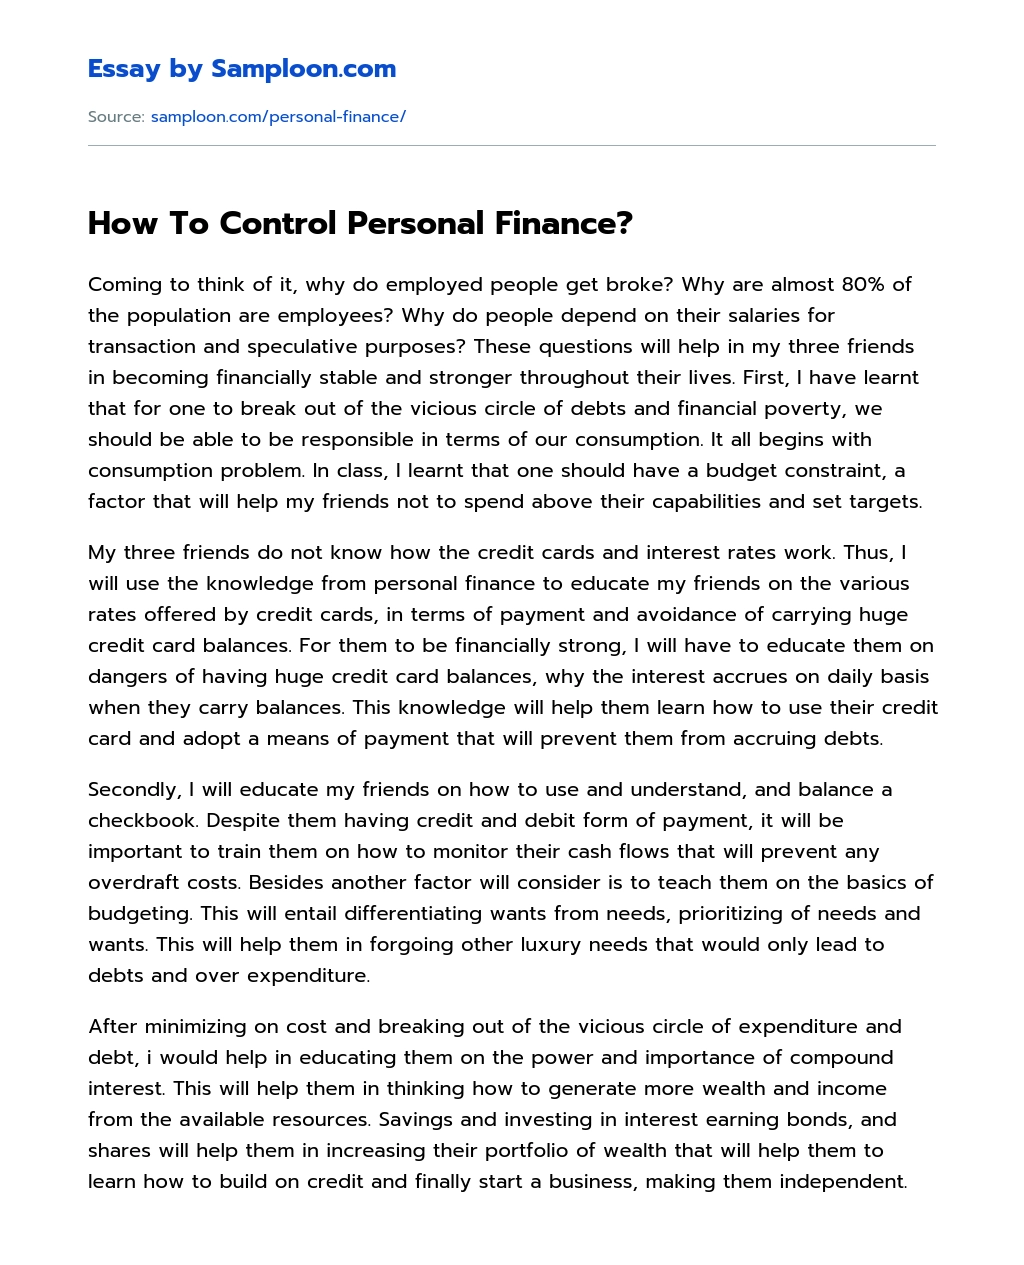 How To Control Personal Finance? essay